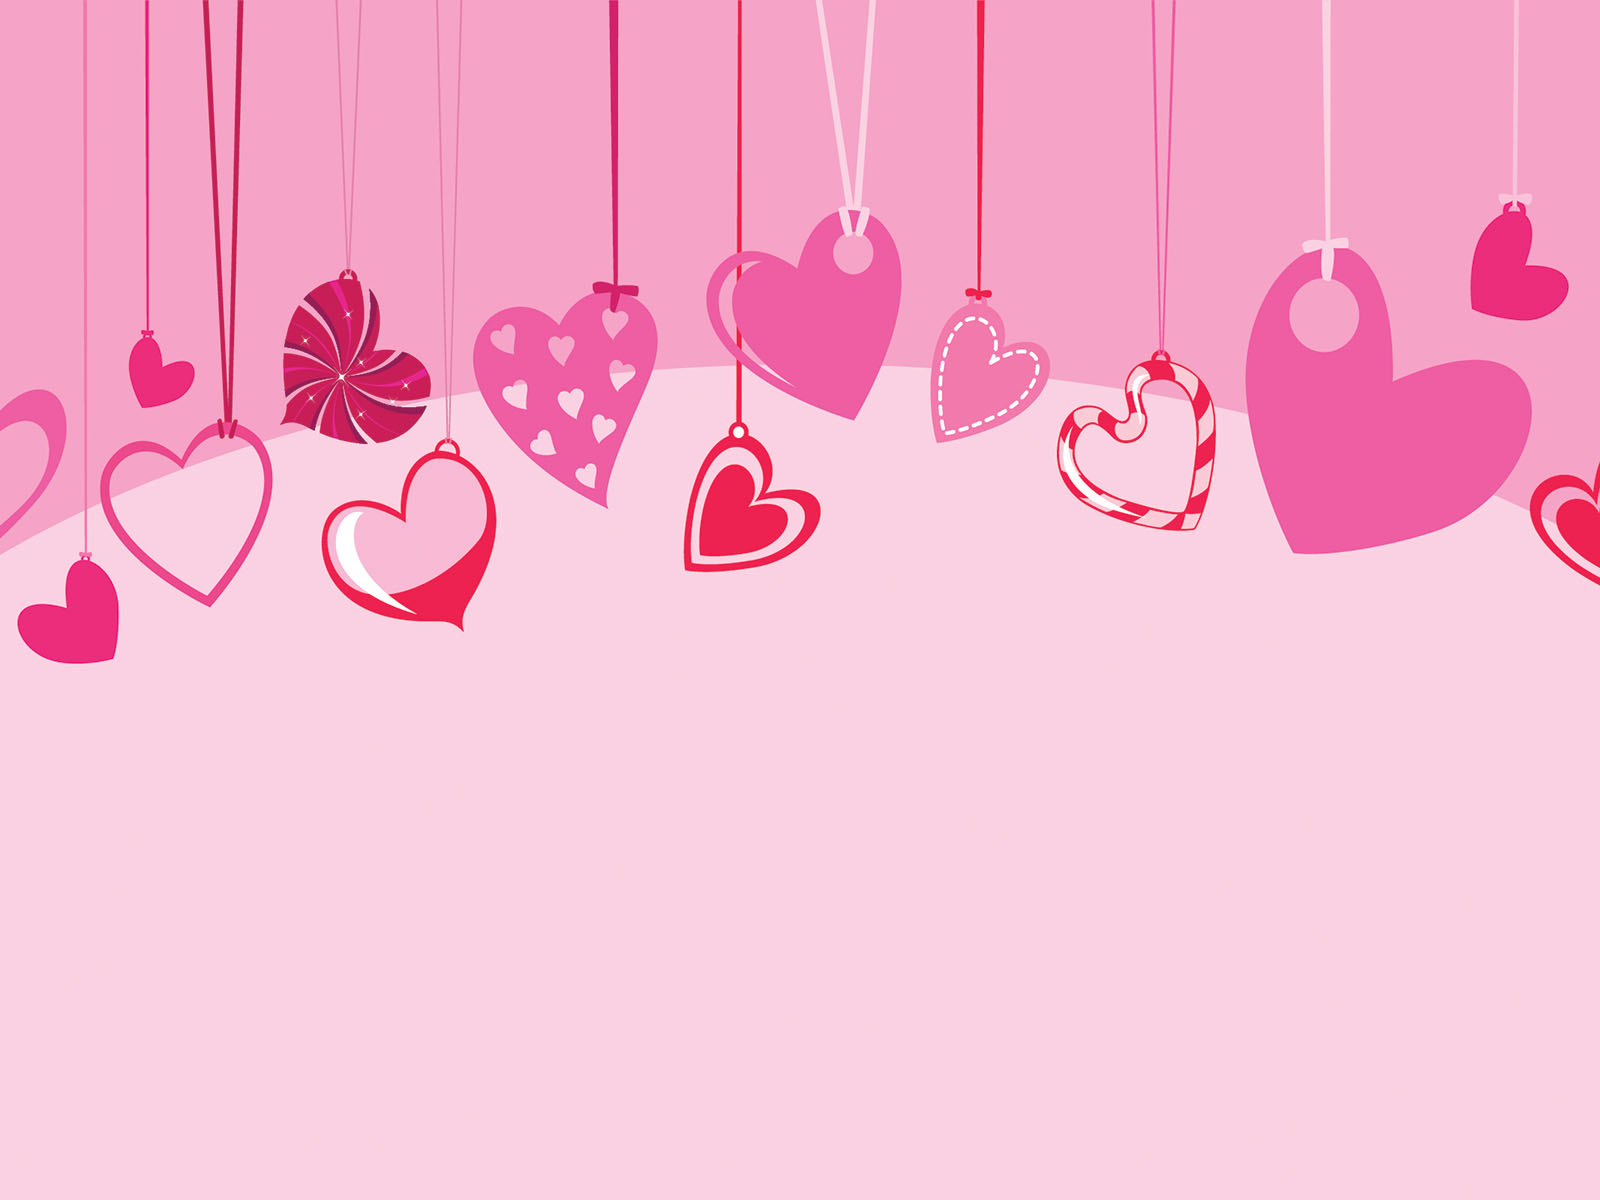 Cute Hearts are Hanging Background